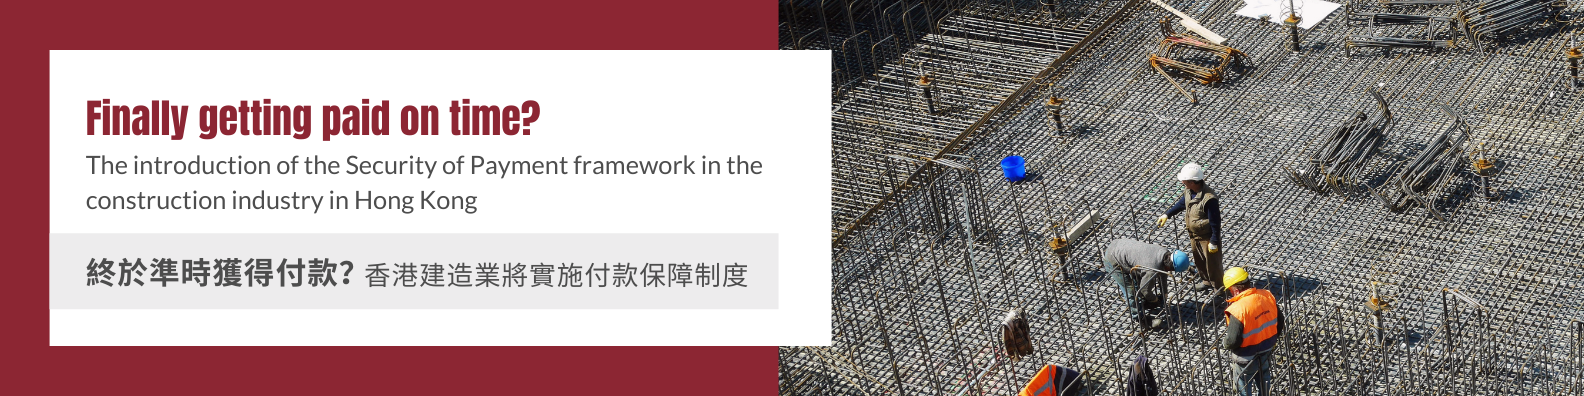 Finally getting paid on time? The introduction of the Security of Payment framework in the construction industry in Hong Kong